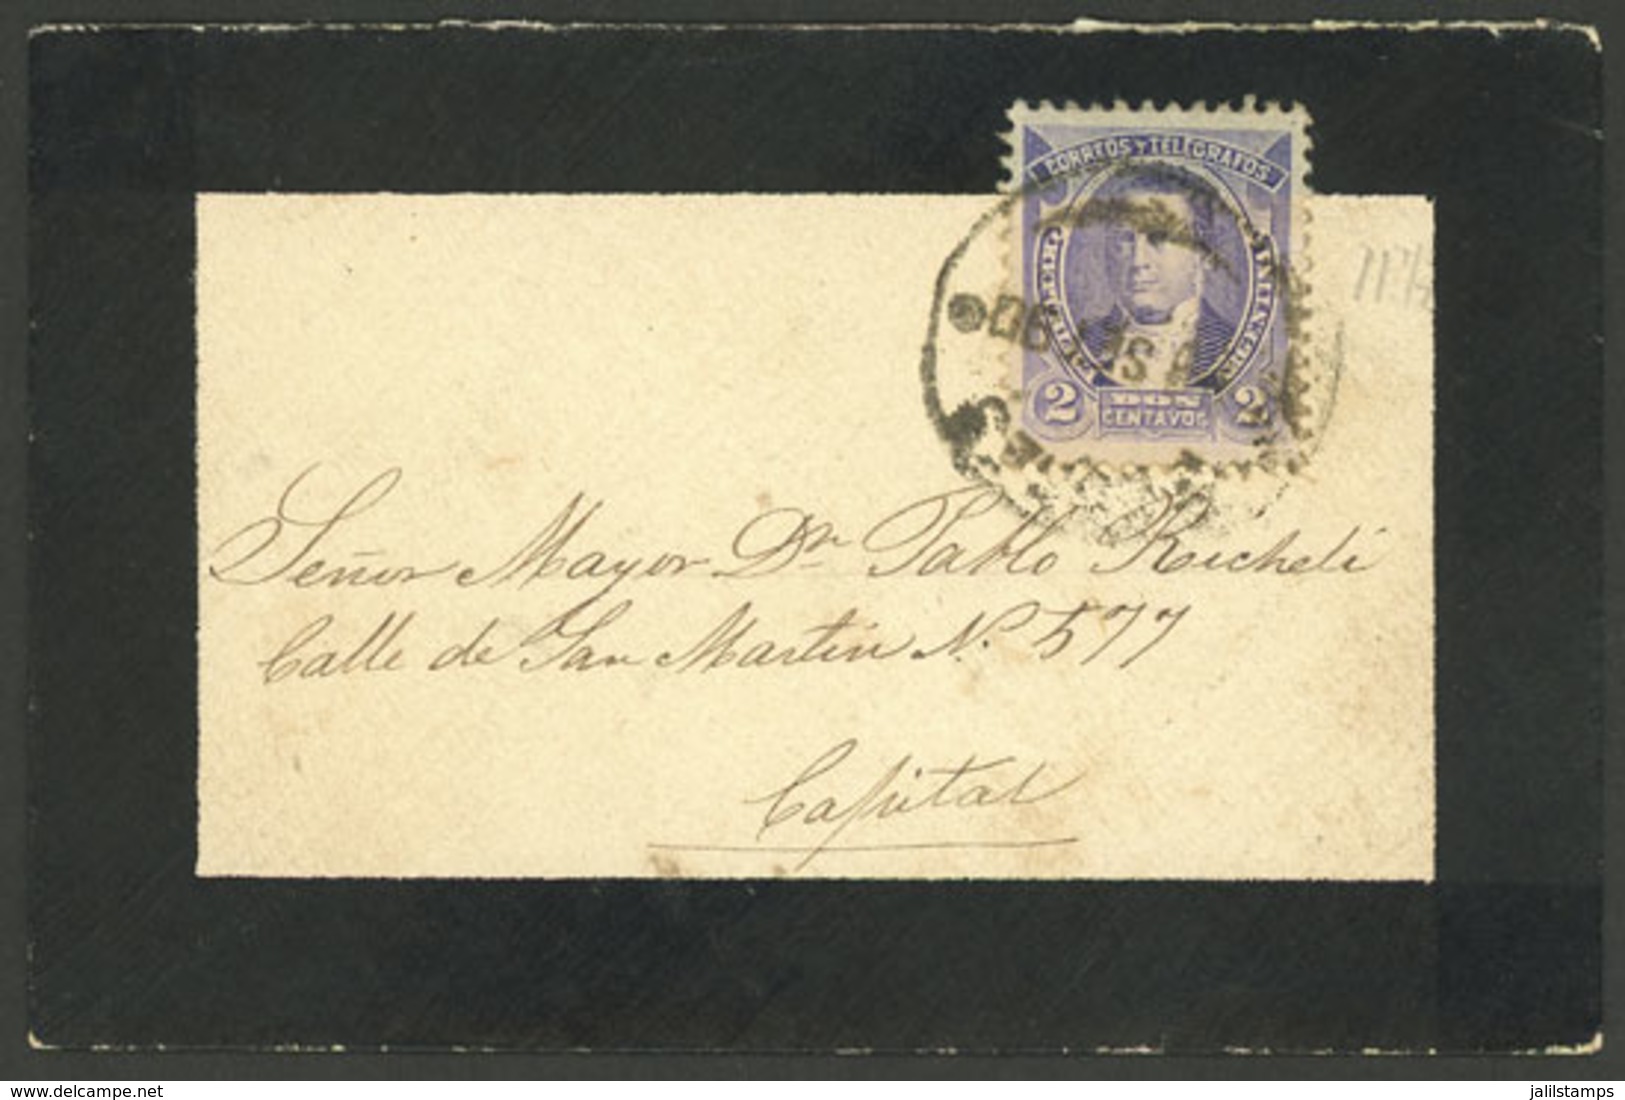 ARGENTINA: Mourning Cover Used In Buenos Aires In SE/1890, Franked With 2c. Derqui, VF Quality - Brieven En Documenten